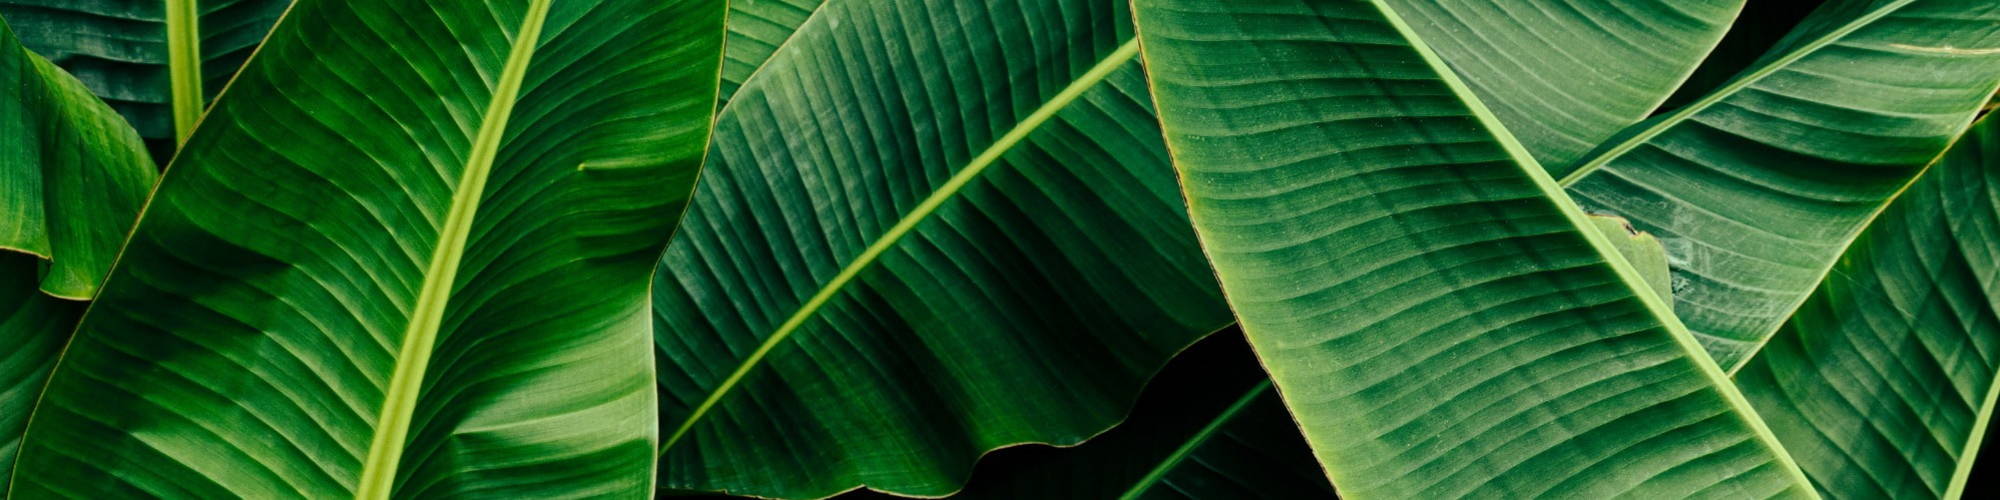 Picture of green banana leaves